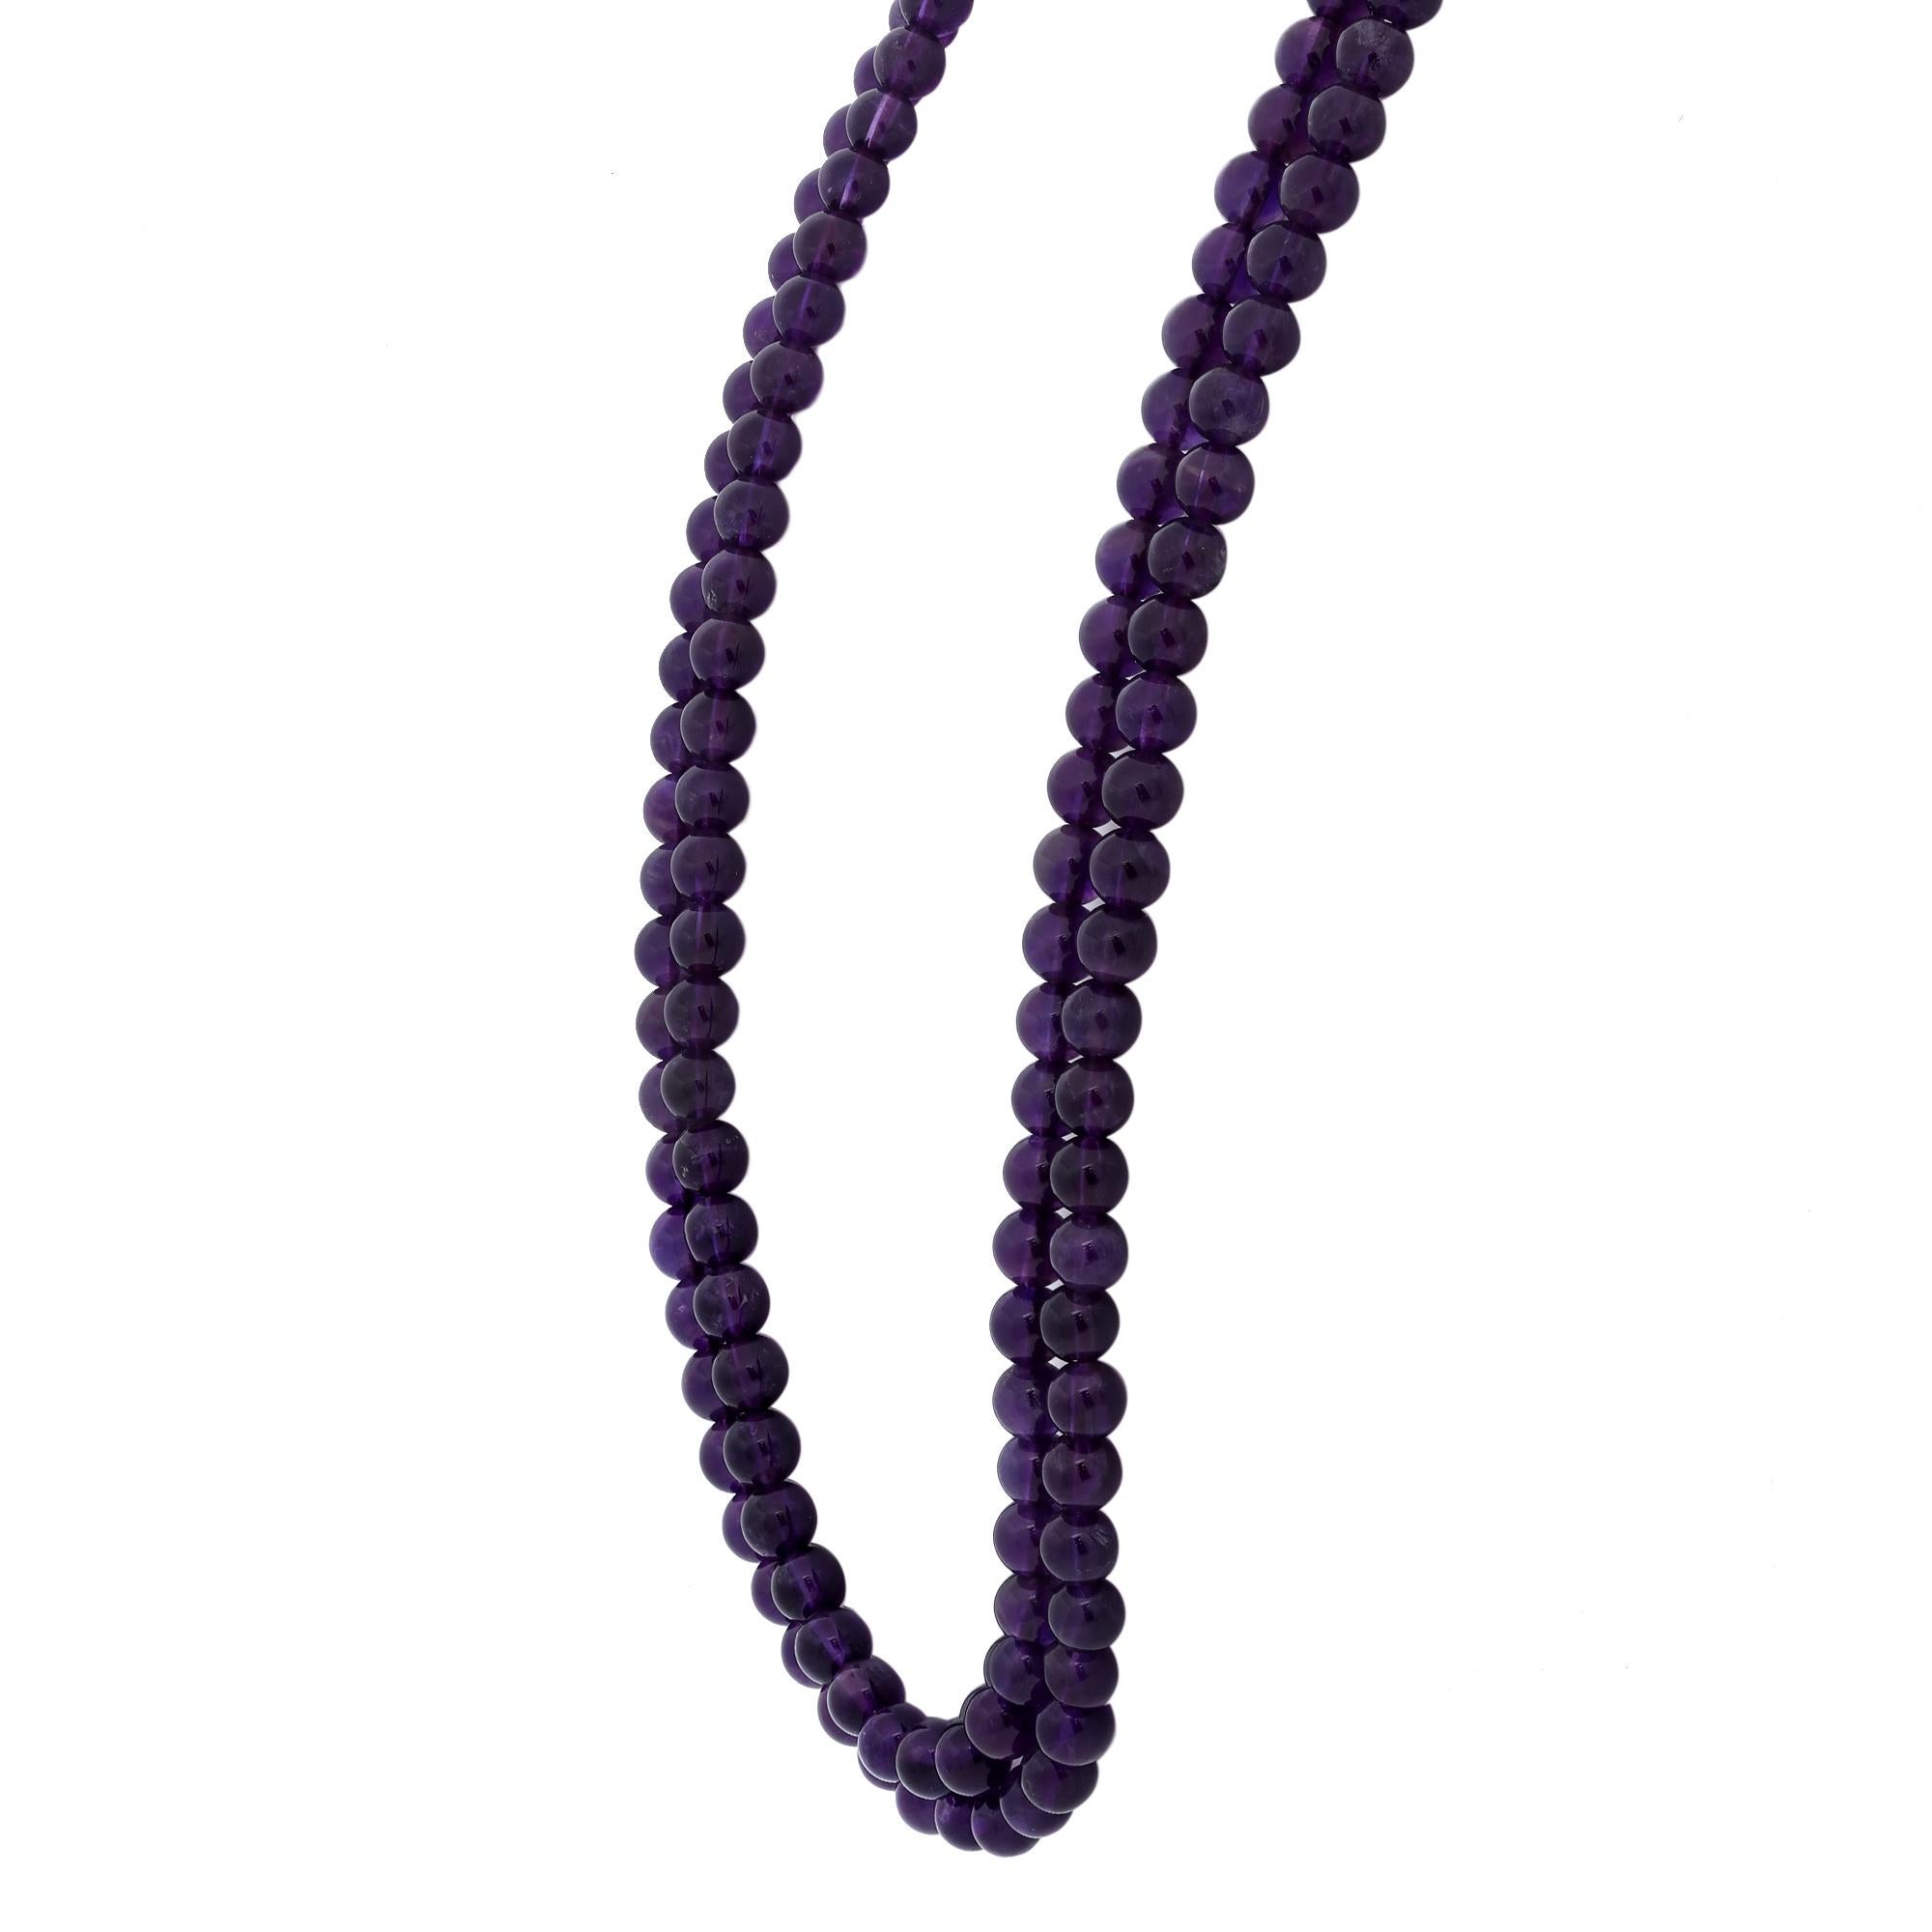 Adorn this gorgeous double strand necklace for an amazing statement look. This necklace features round Amethyst beads, well matched. Handcrafted with perfection. Necklace length: 18 Inches. Total weight 45.95 grams. Great pre-owned condition. Comes